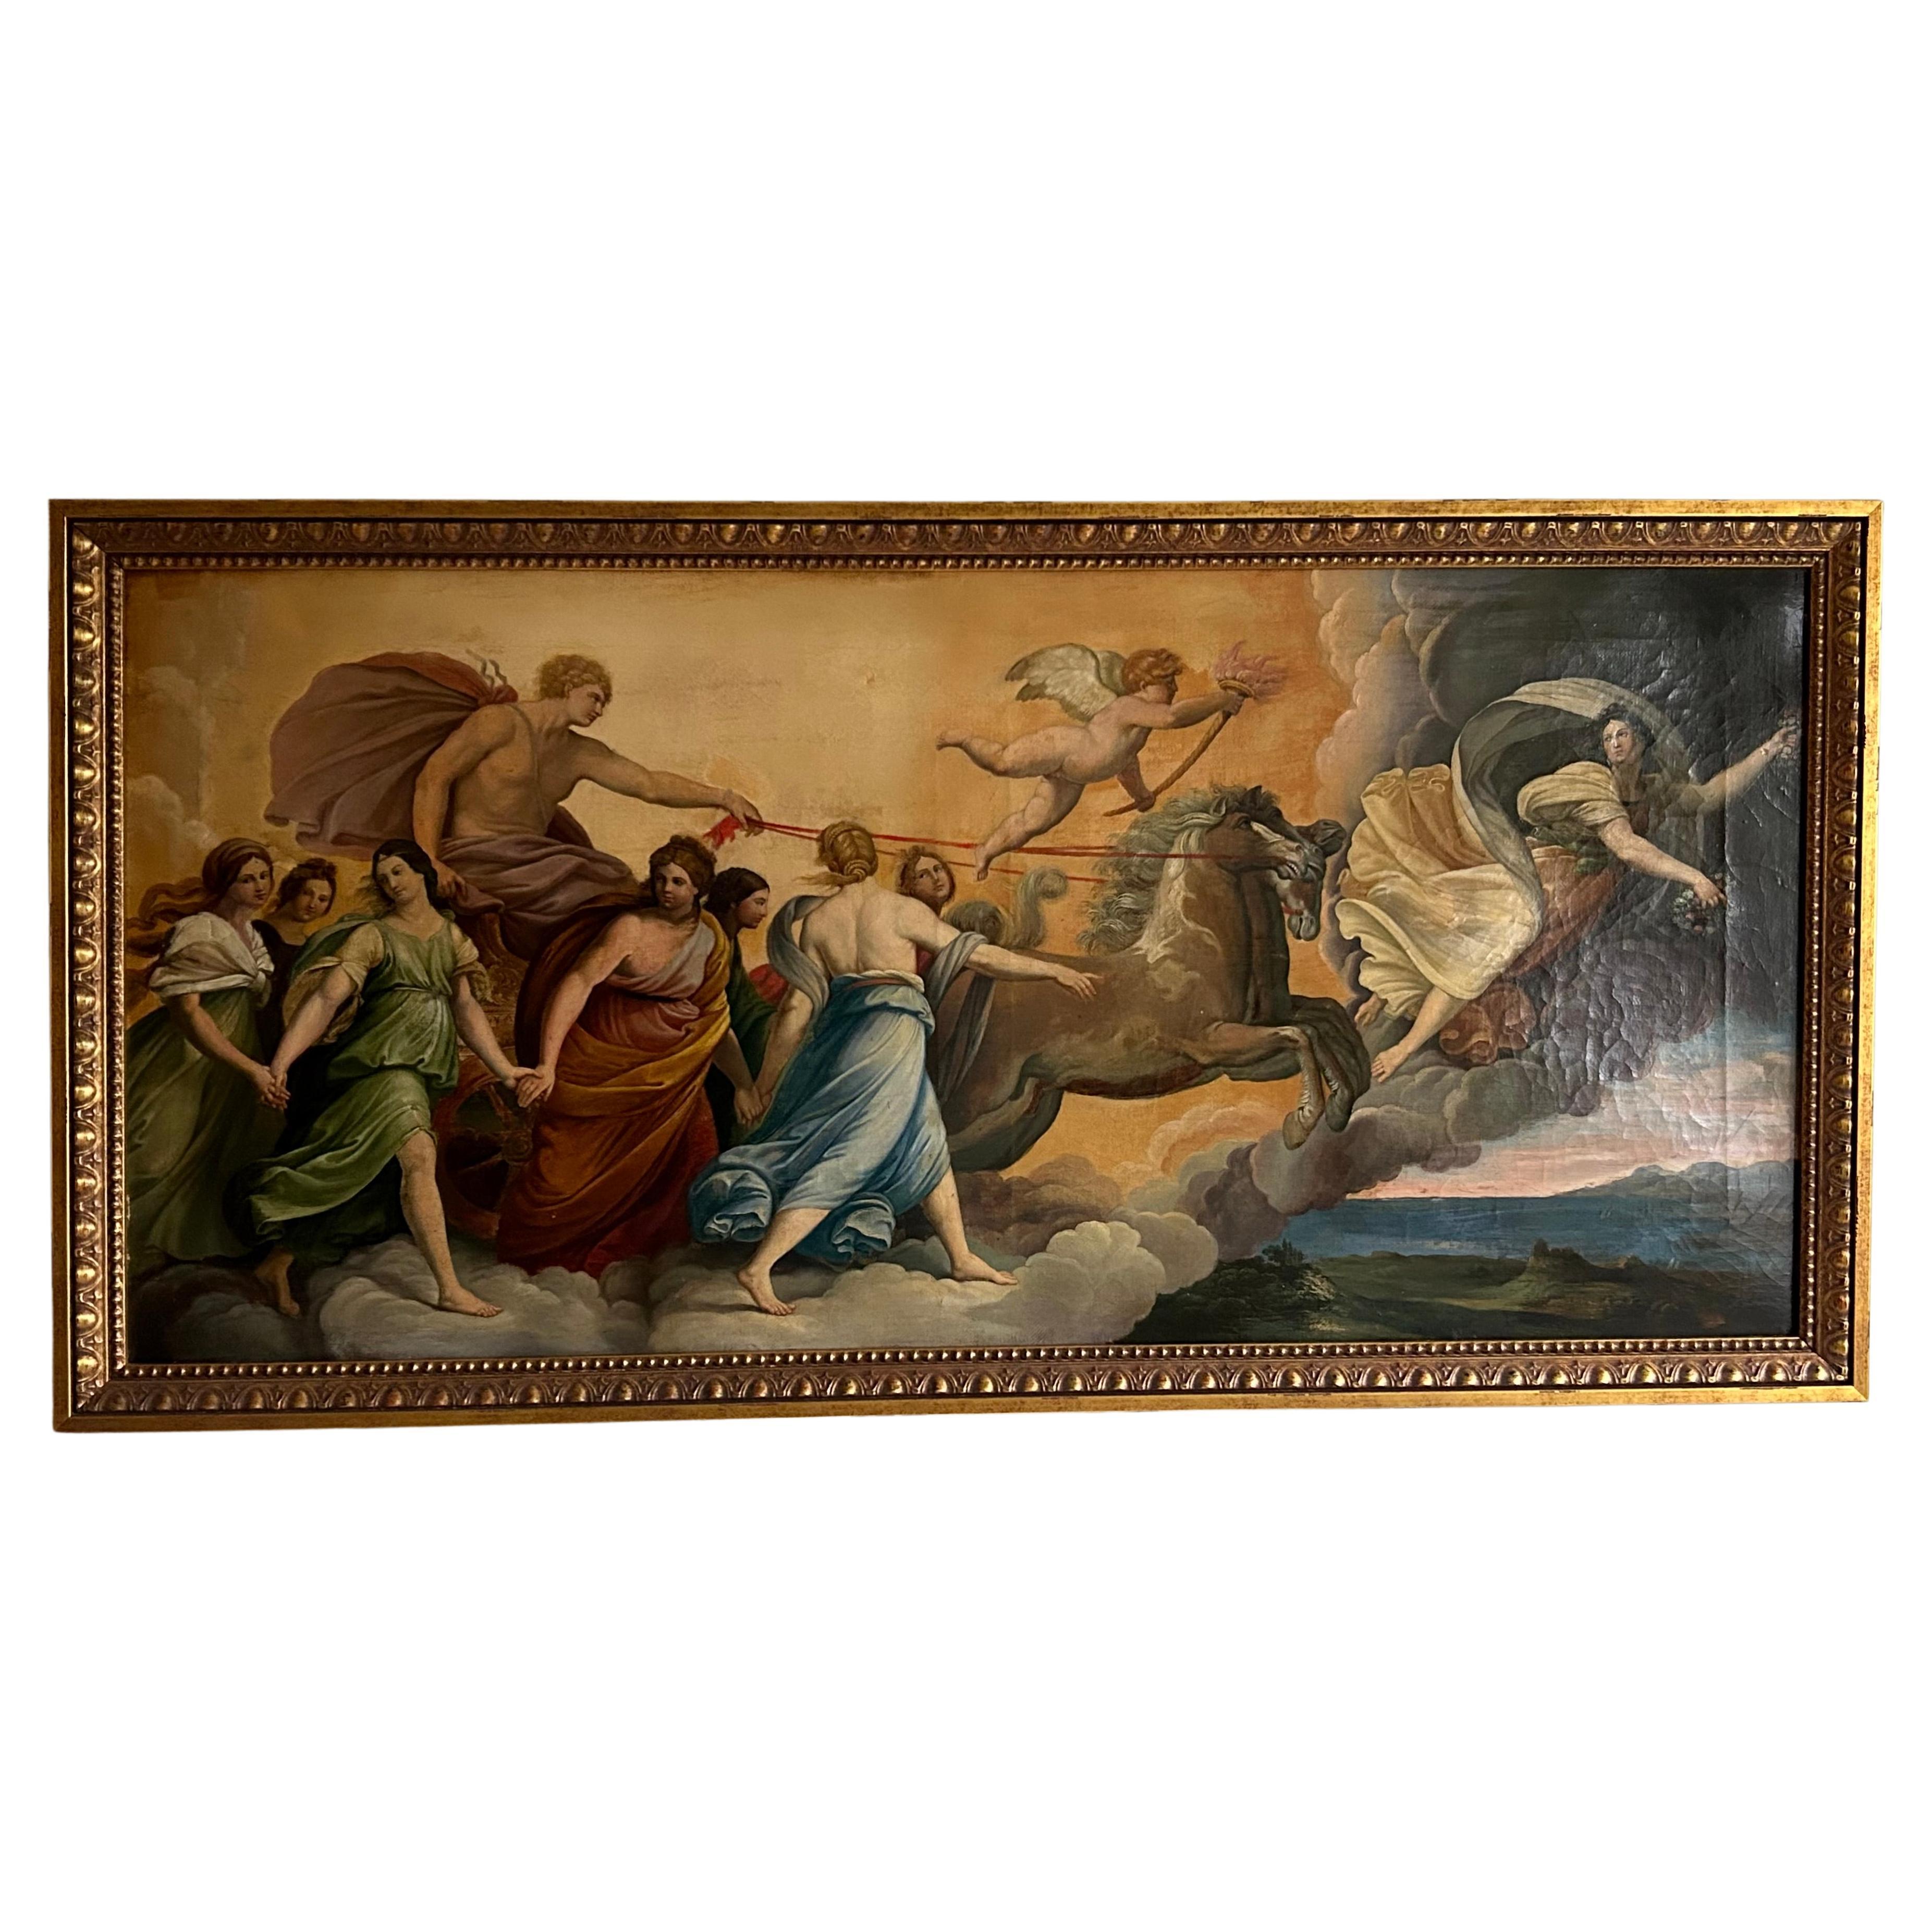 Wonderful 19th century copy of Guido Reni's masterpiece, The Aurora,  a large Baroque ceiling fresco painted  in 1614 for the Casino, or garden house, adjacent to the Palazzo Pallavicini-Rospigliosi, in Rome. The work is considered Reni's